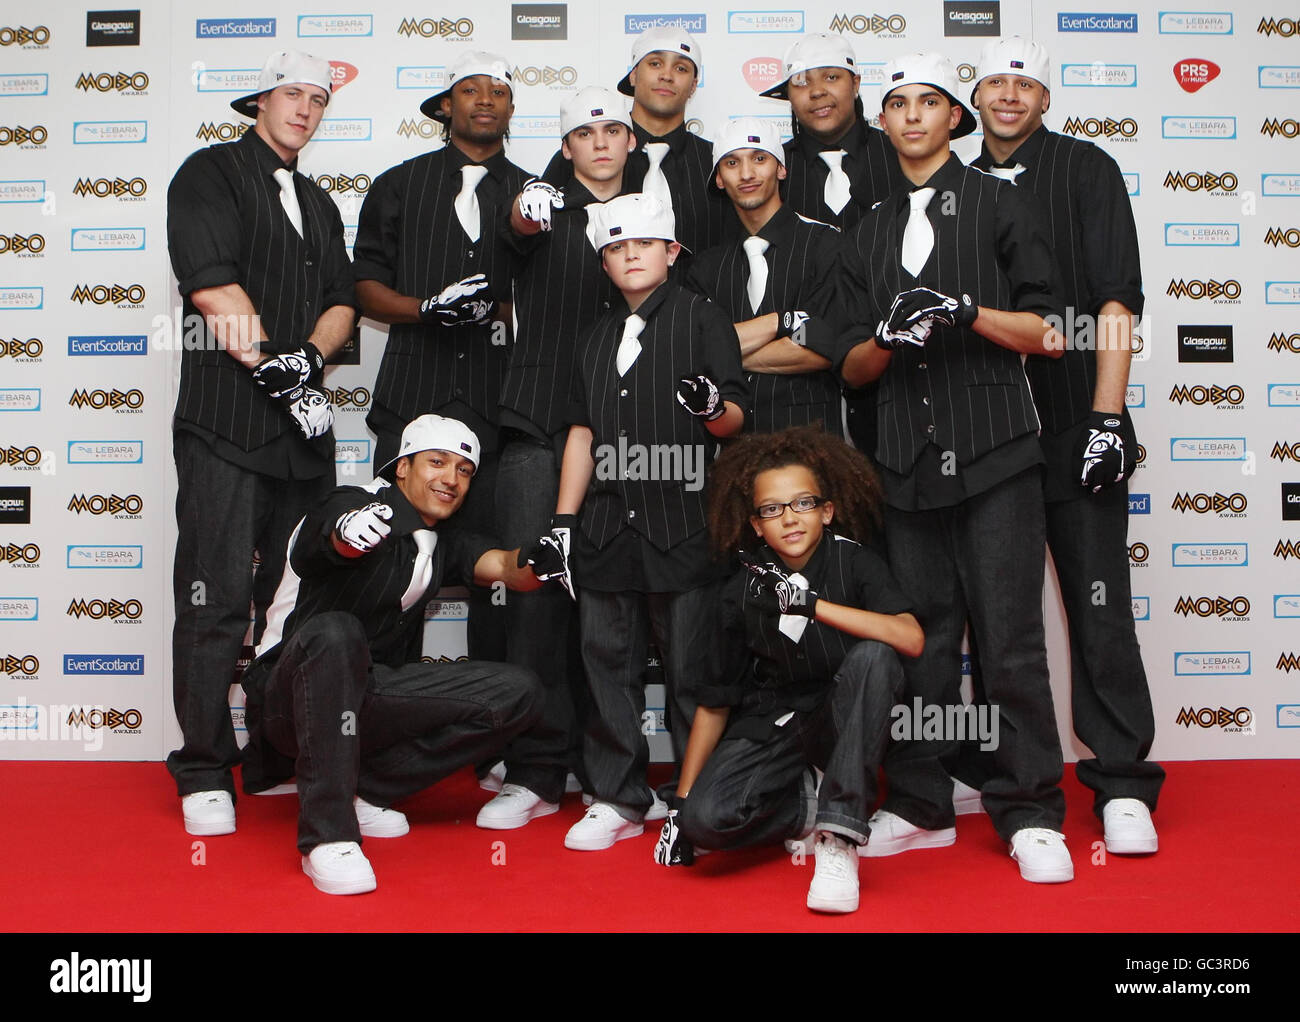 Diversity backstage during the 2009 MOBO awards at the SECC in Glasgow. Stock Photo